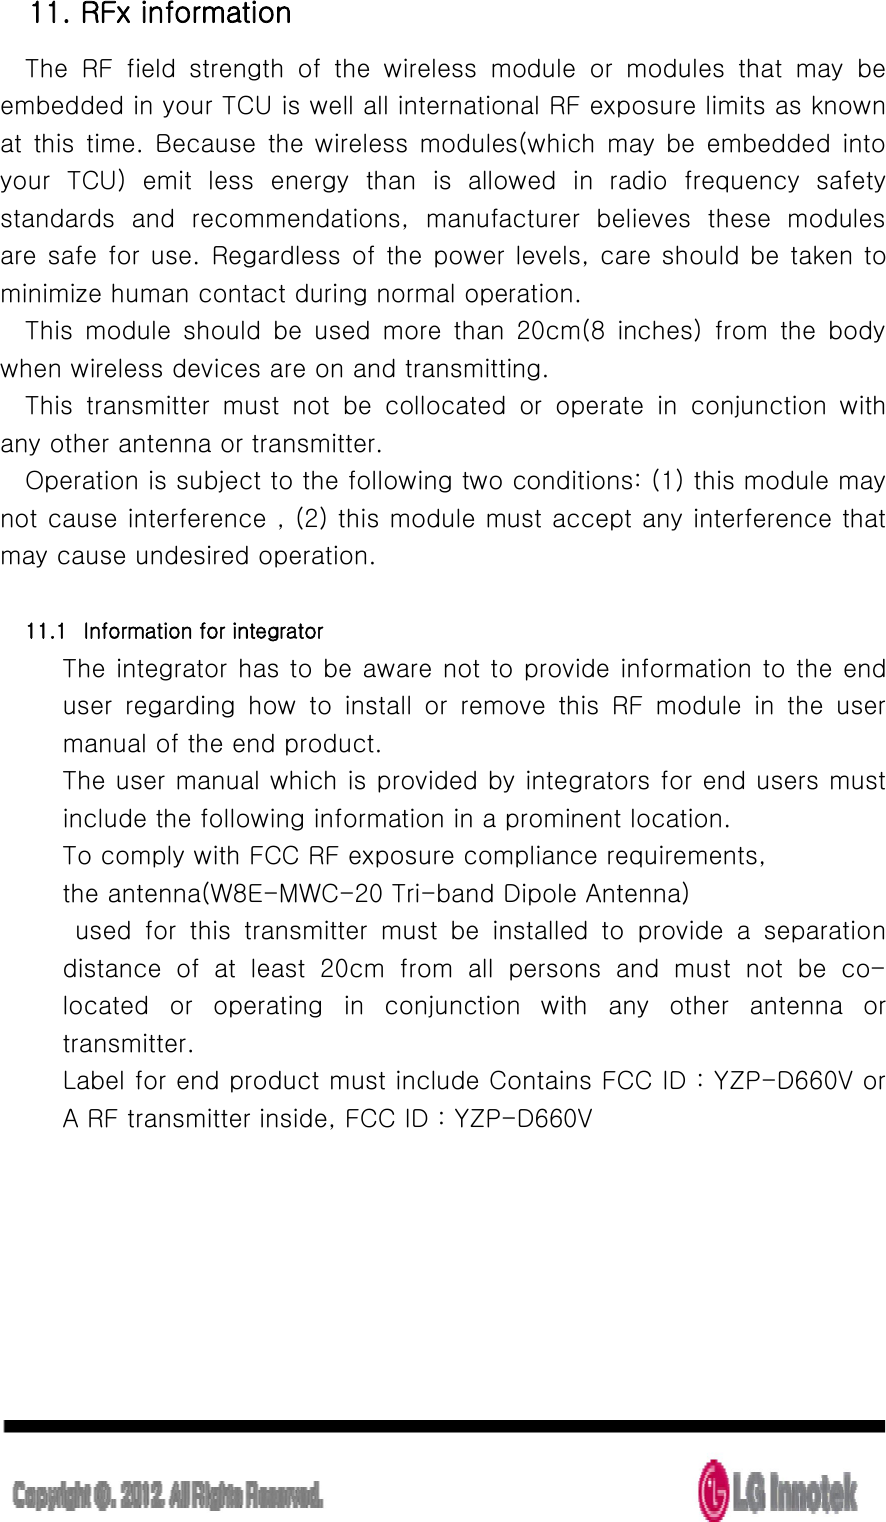  11. RFx information The  RF  field  strength  of  the  wireless  module  or  modules  that  may  be embedded in your TCU is well all international RF exposure limits as known at  this  time.  Because  the wireless modules(which  may  be embedded  into your  TCU)  emit  less  energy  than  is  allowed  in  radio  frequency  safety standards  and  recommendations,  manufacturer  believes  these  modules   are safe for use. Regardless of the power levels, care should be taken to minimize human contact during normal operation. This  module  should  be  used  more  than  20cm(8  inches)  from  the  body when wireless devices are on and transmitting. This  transmitter  must  not  be  collocated  or  operate  in  conjunction  with any other antenna or transmitter. Operation is subject to the following two conditions: (1) this module may not cause interference , (2) this module must accept any interference that may cause undesired operation.  11.1 Information for integrator The integrator has to be aware not to provide information to the end user  regarding  how  to  install  or  remove  this  RF  module  in  the  user manual of the end product. The user manual which is provided by integrators for end users must include the following information in a prominent location. To comply with FCC RF exposure compliance requirements,       the antenna(W8E-MWC-20 Tri-band Dipole Antenna)     used  for  this  transmitter  must  be  installed  to  provide  a  separation distance  of  at  least  20cm  from  all  persons  and  must  not  be  co-located  or  operating  in  conjunction  with  any  other  antenna  or transmitter. Label for end product must include Contains FCC ID : YZP-D660V or A RF transmitter inside, FCC ID : YZP-D660V      